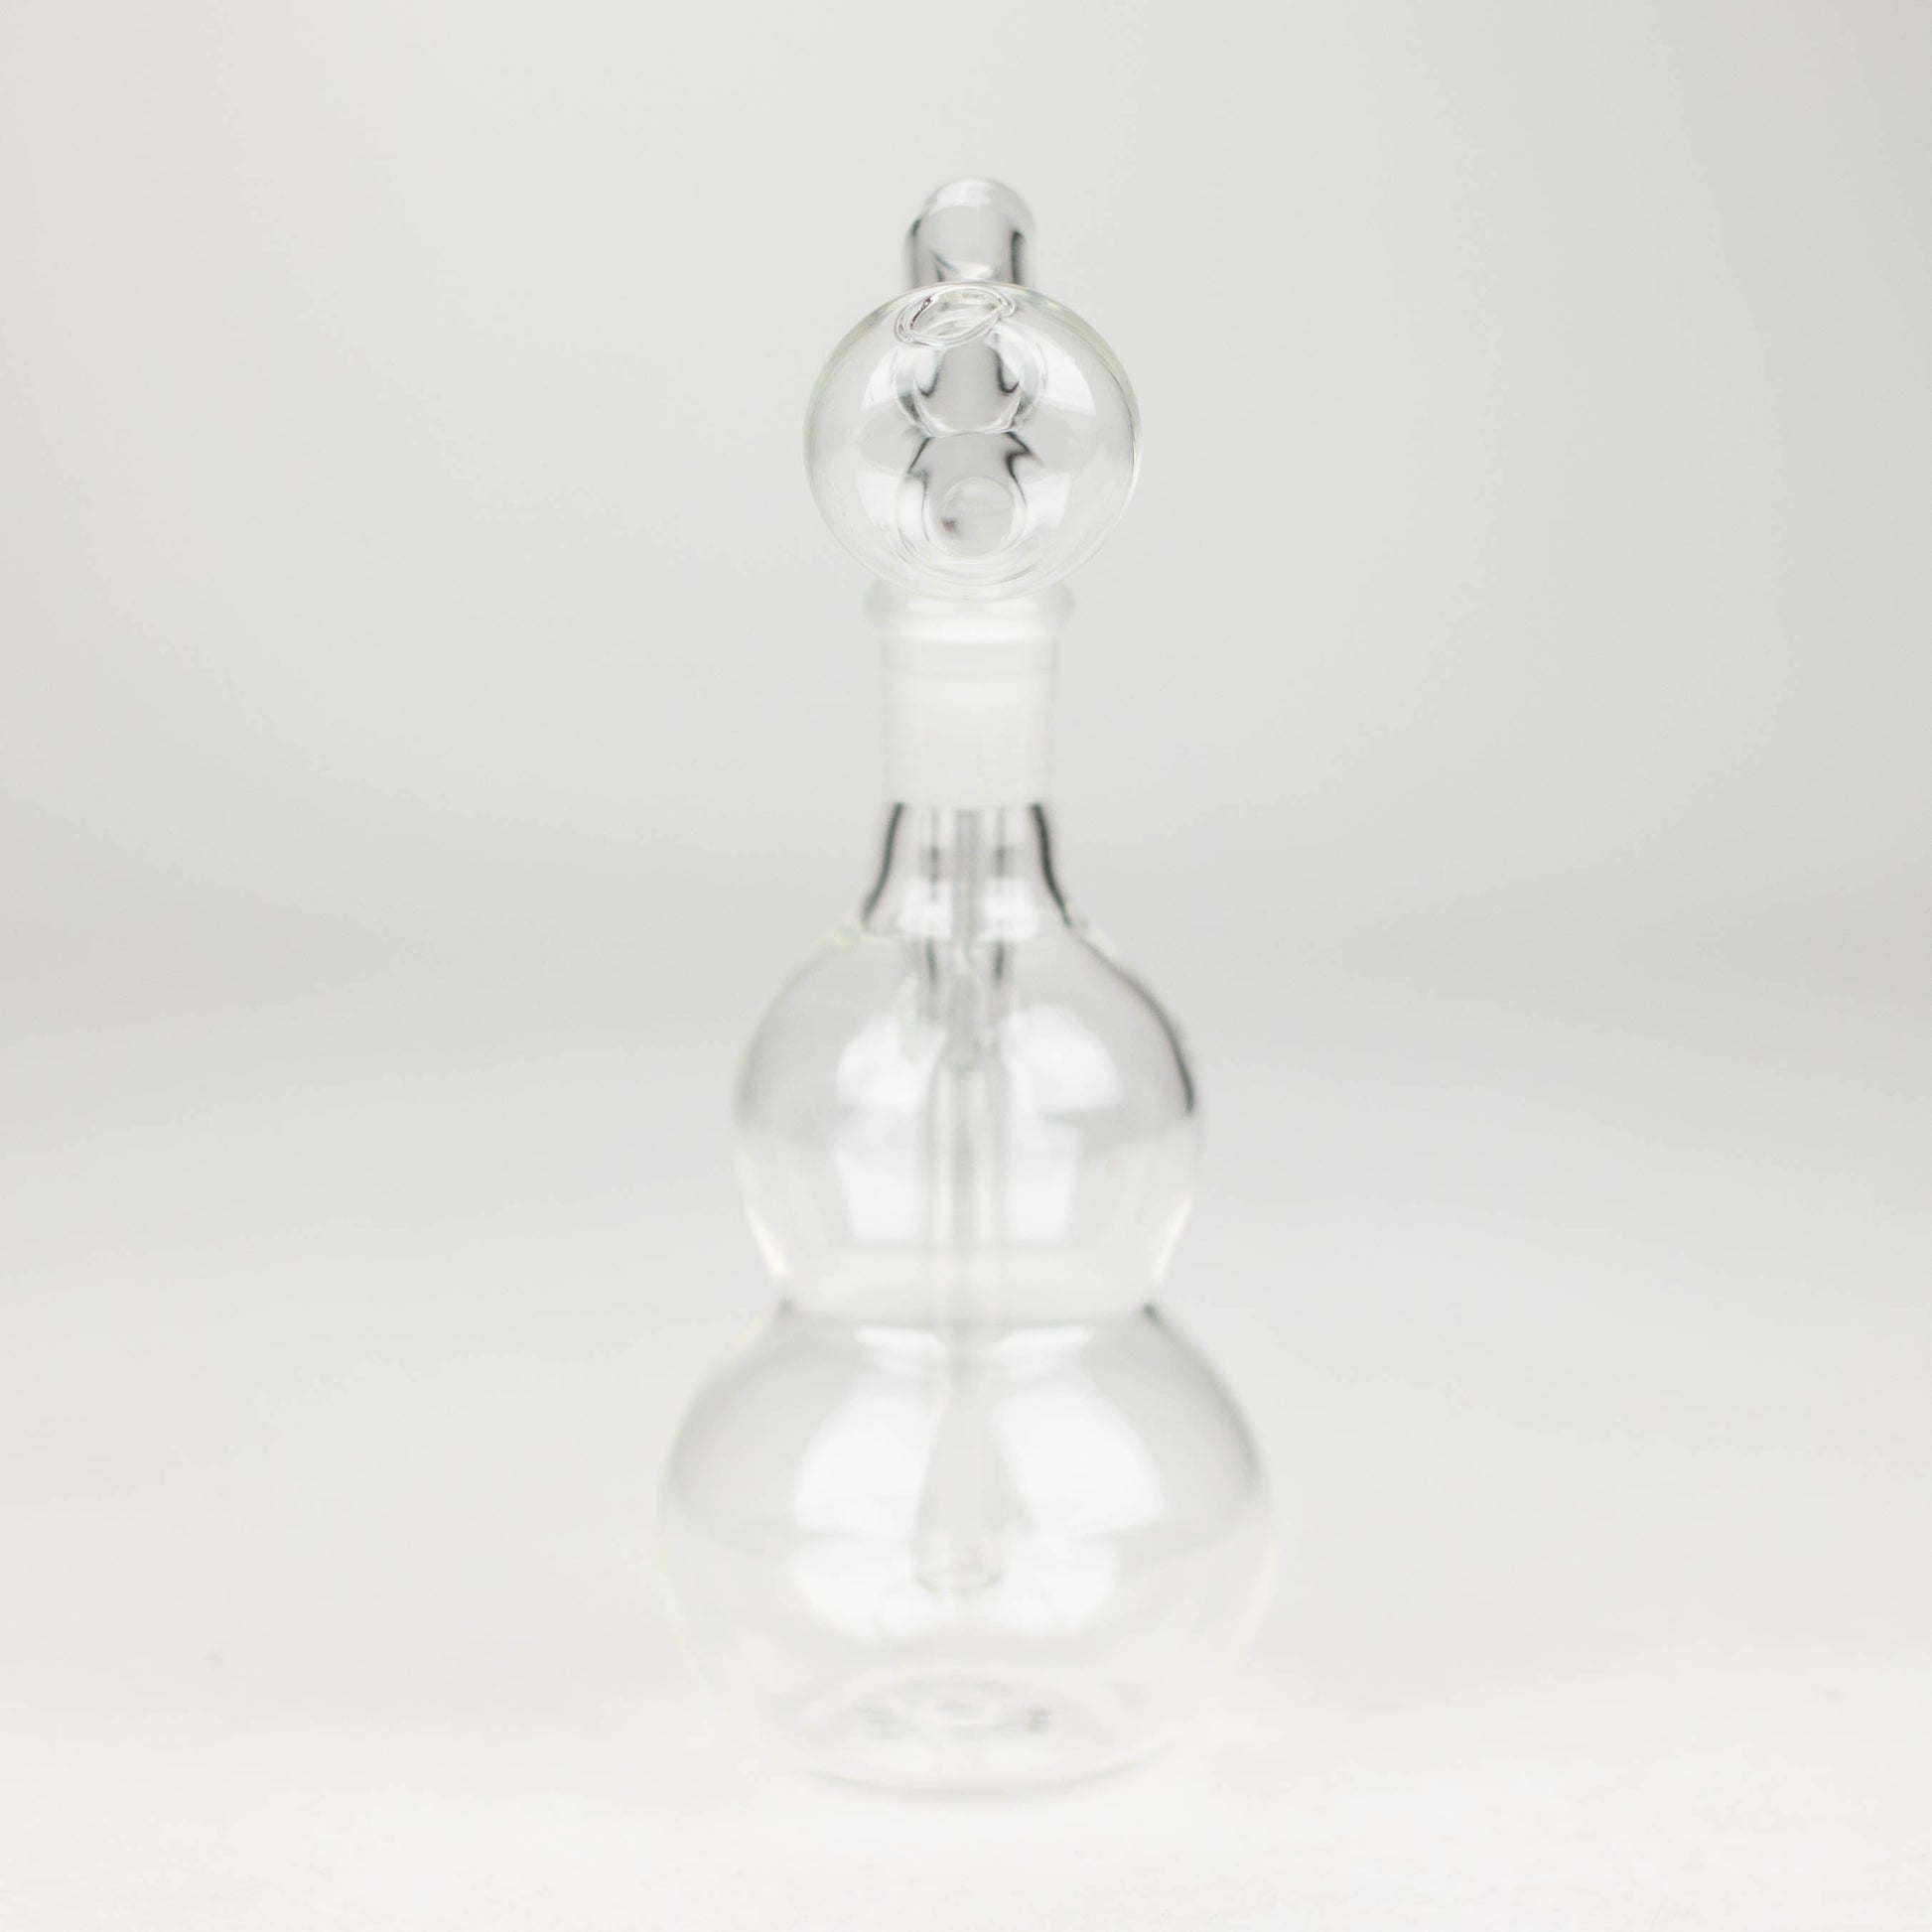 6" glass oil rig_1